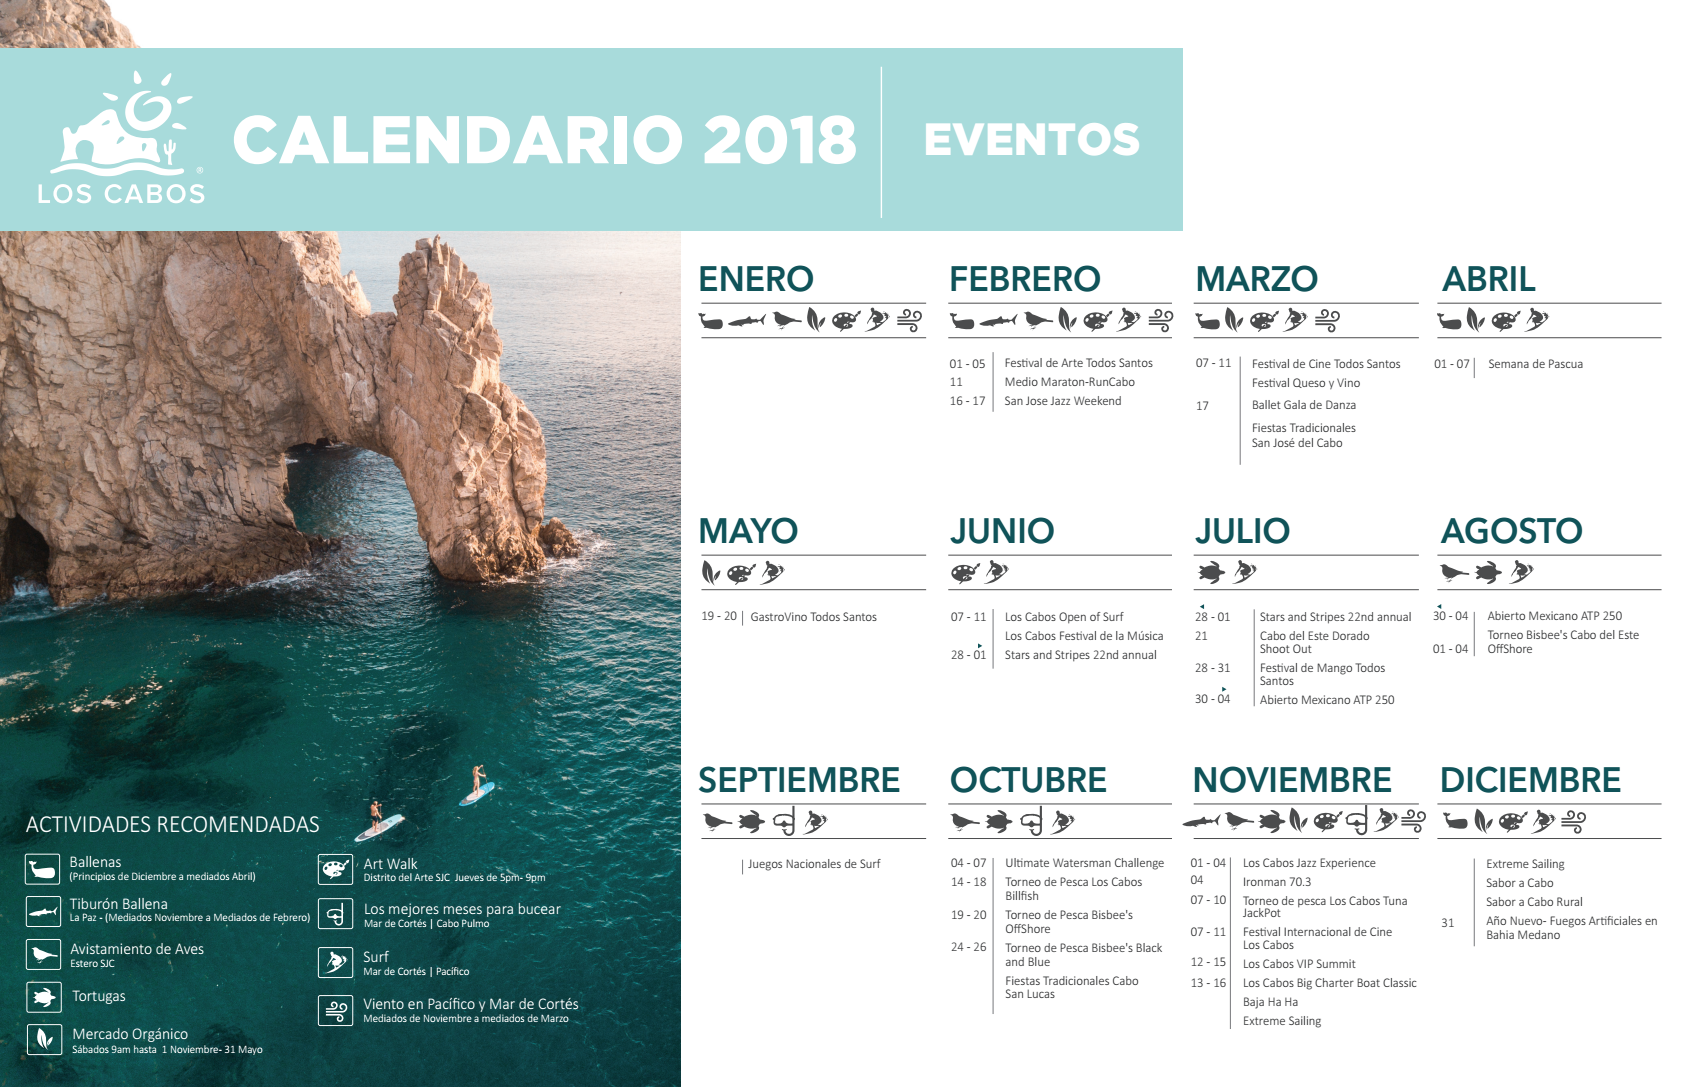 Events Calendar 2018 Cabo News Today Los Cabos Events and Social in